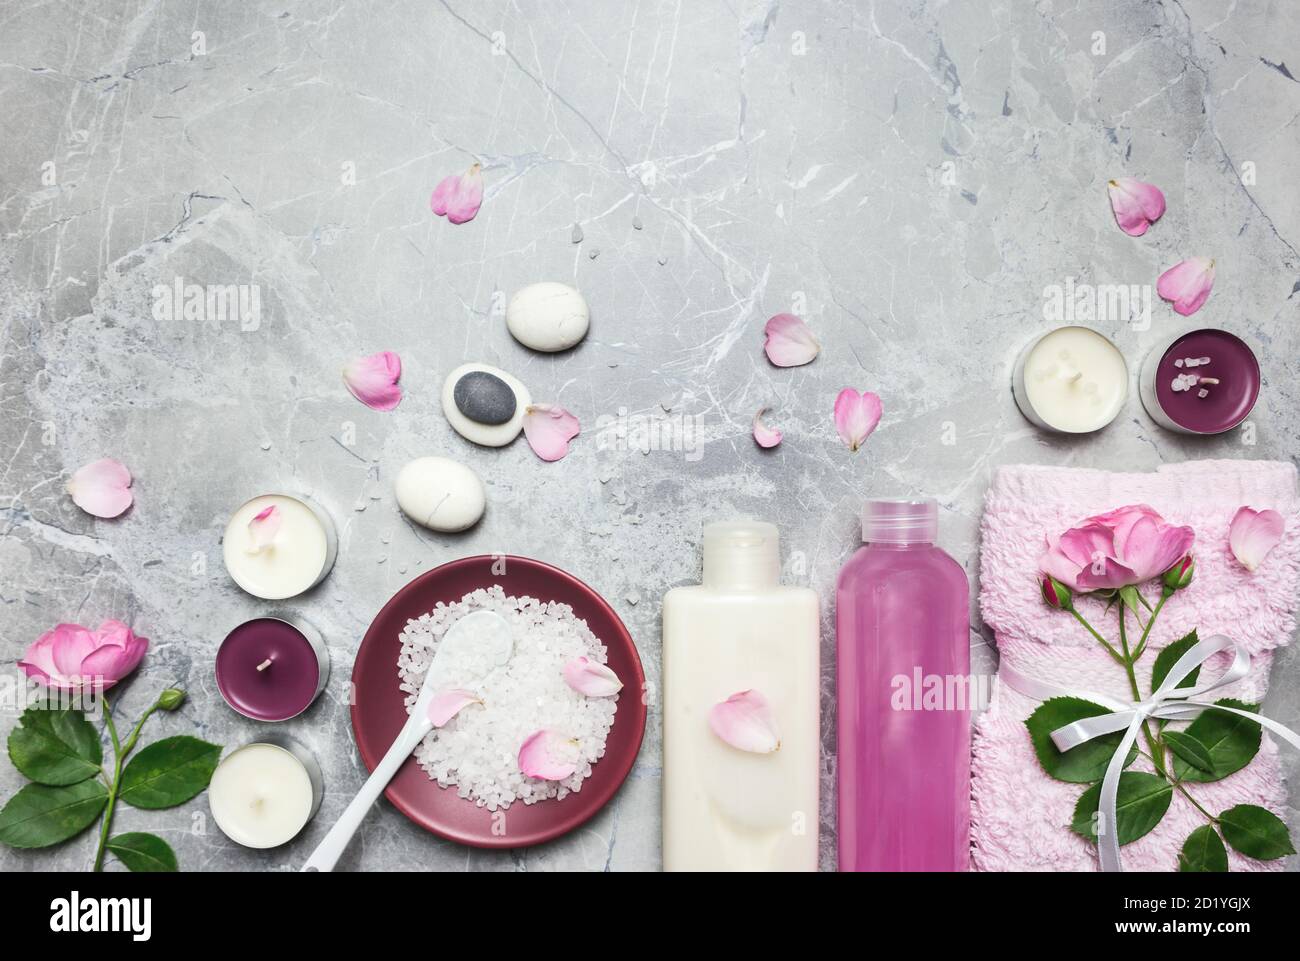 Female skin and body care cosmetic products on gray marble background. Beauty blogger, salon treatments concept. Flat lay, top view with copy space. Stock Photo